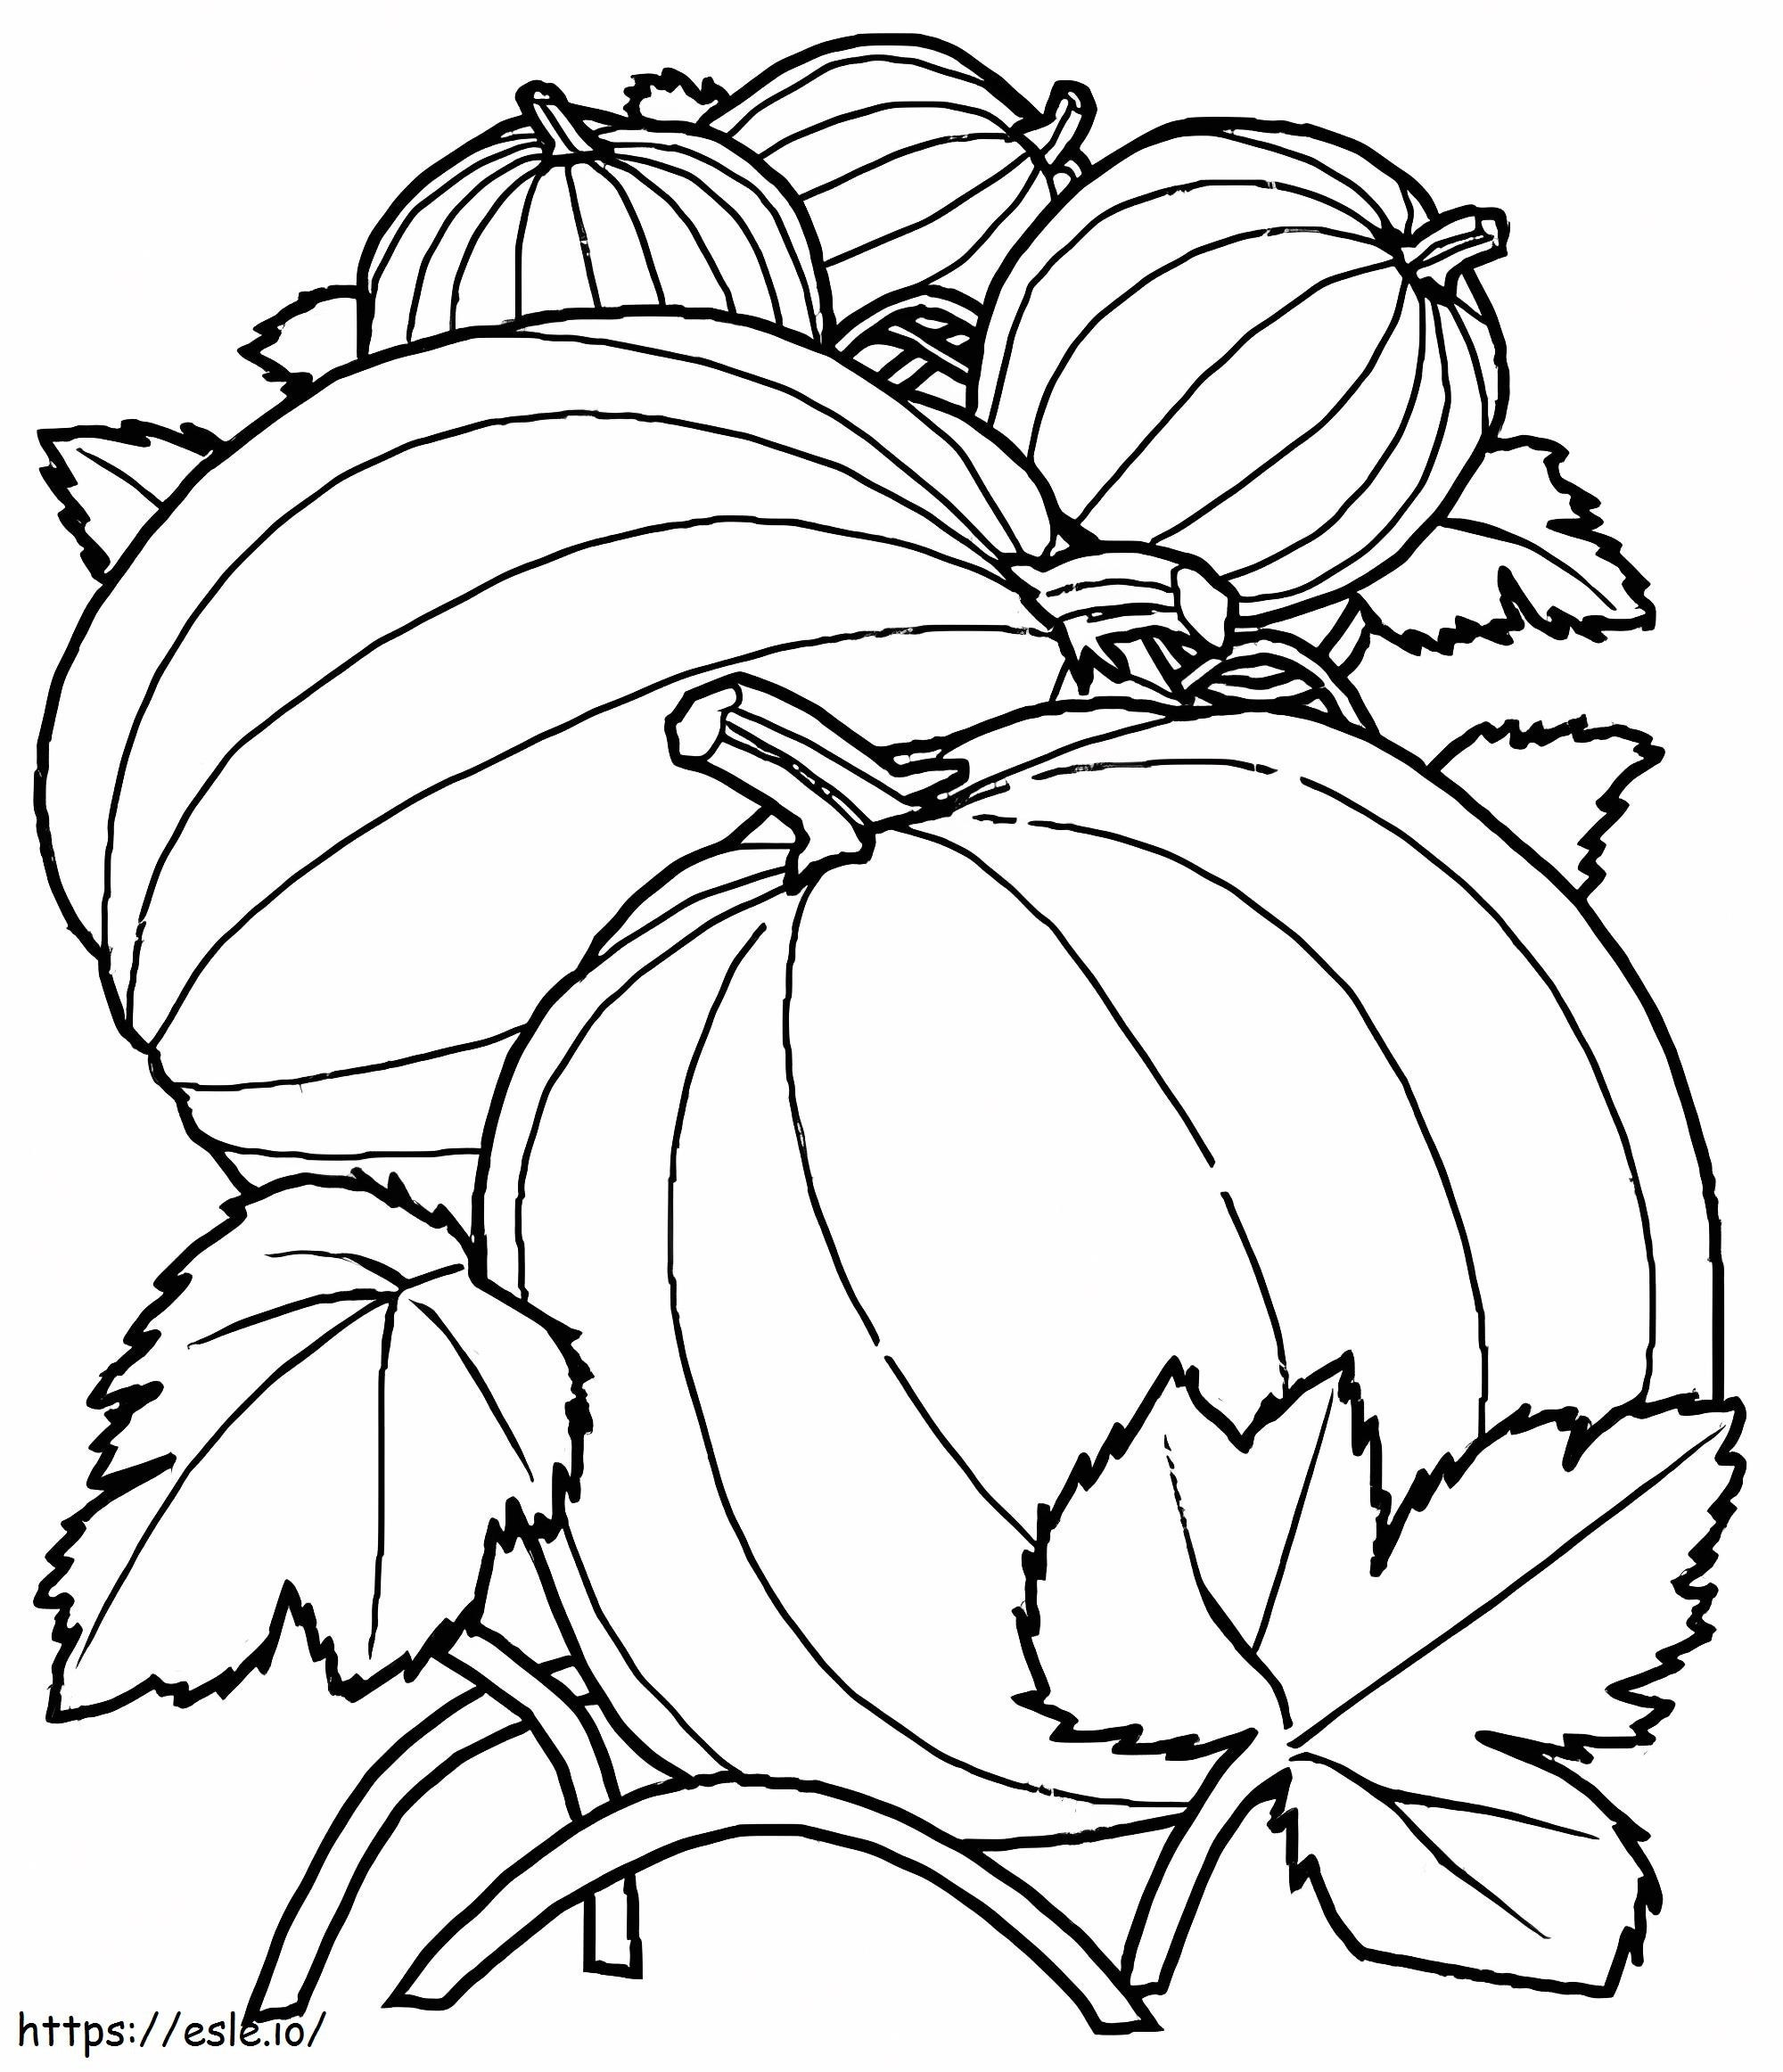 Pumpkin Patch To Color coloring page